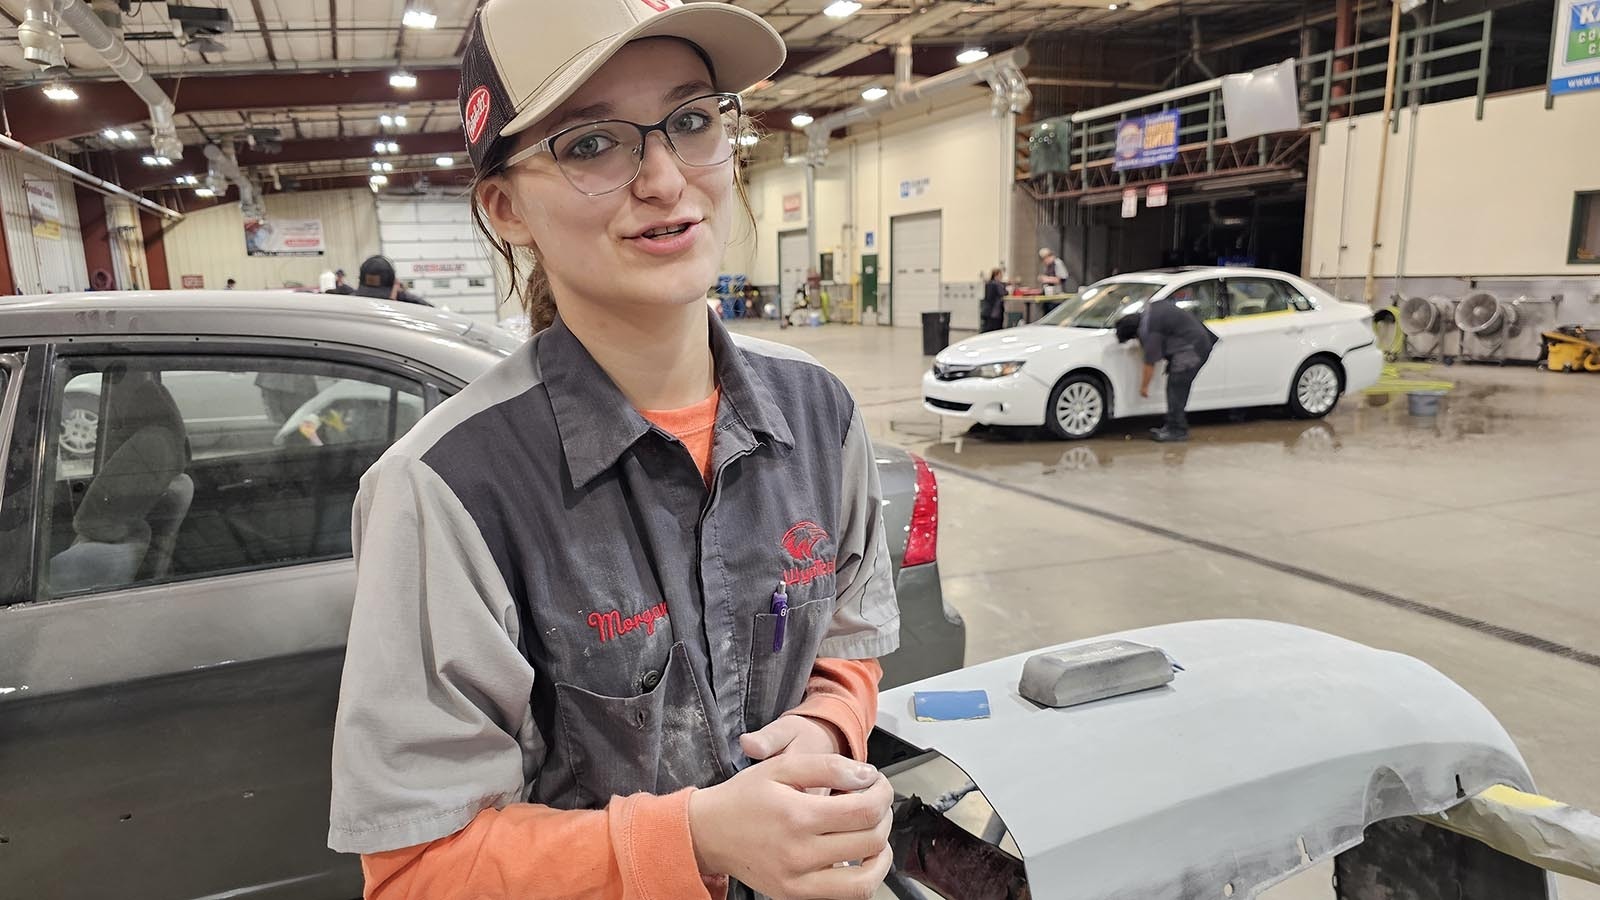 Morgan Graber styling in a new Peterbilt hat was excited about the job she nabbed with Peterbilt during the career and technical training school's most recent job fair.